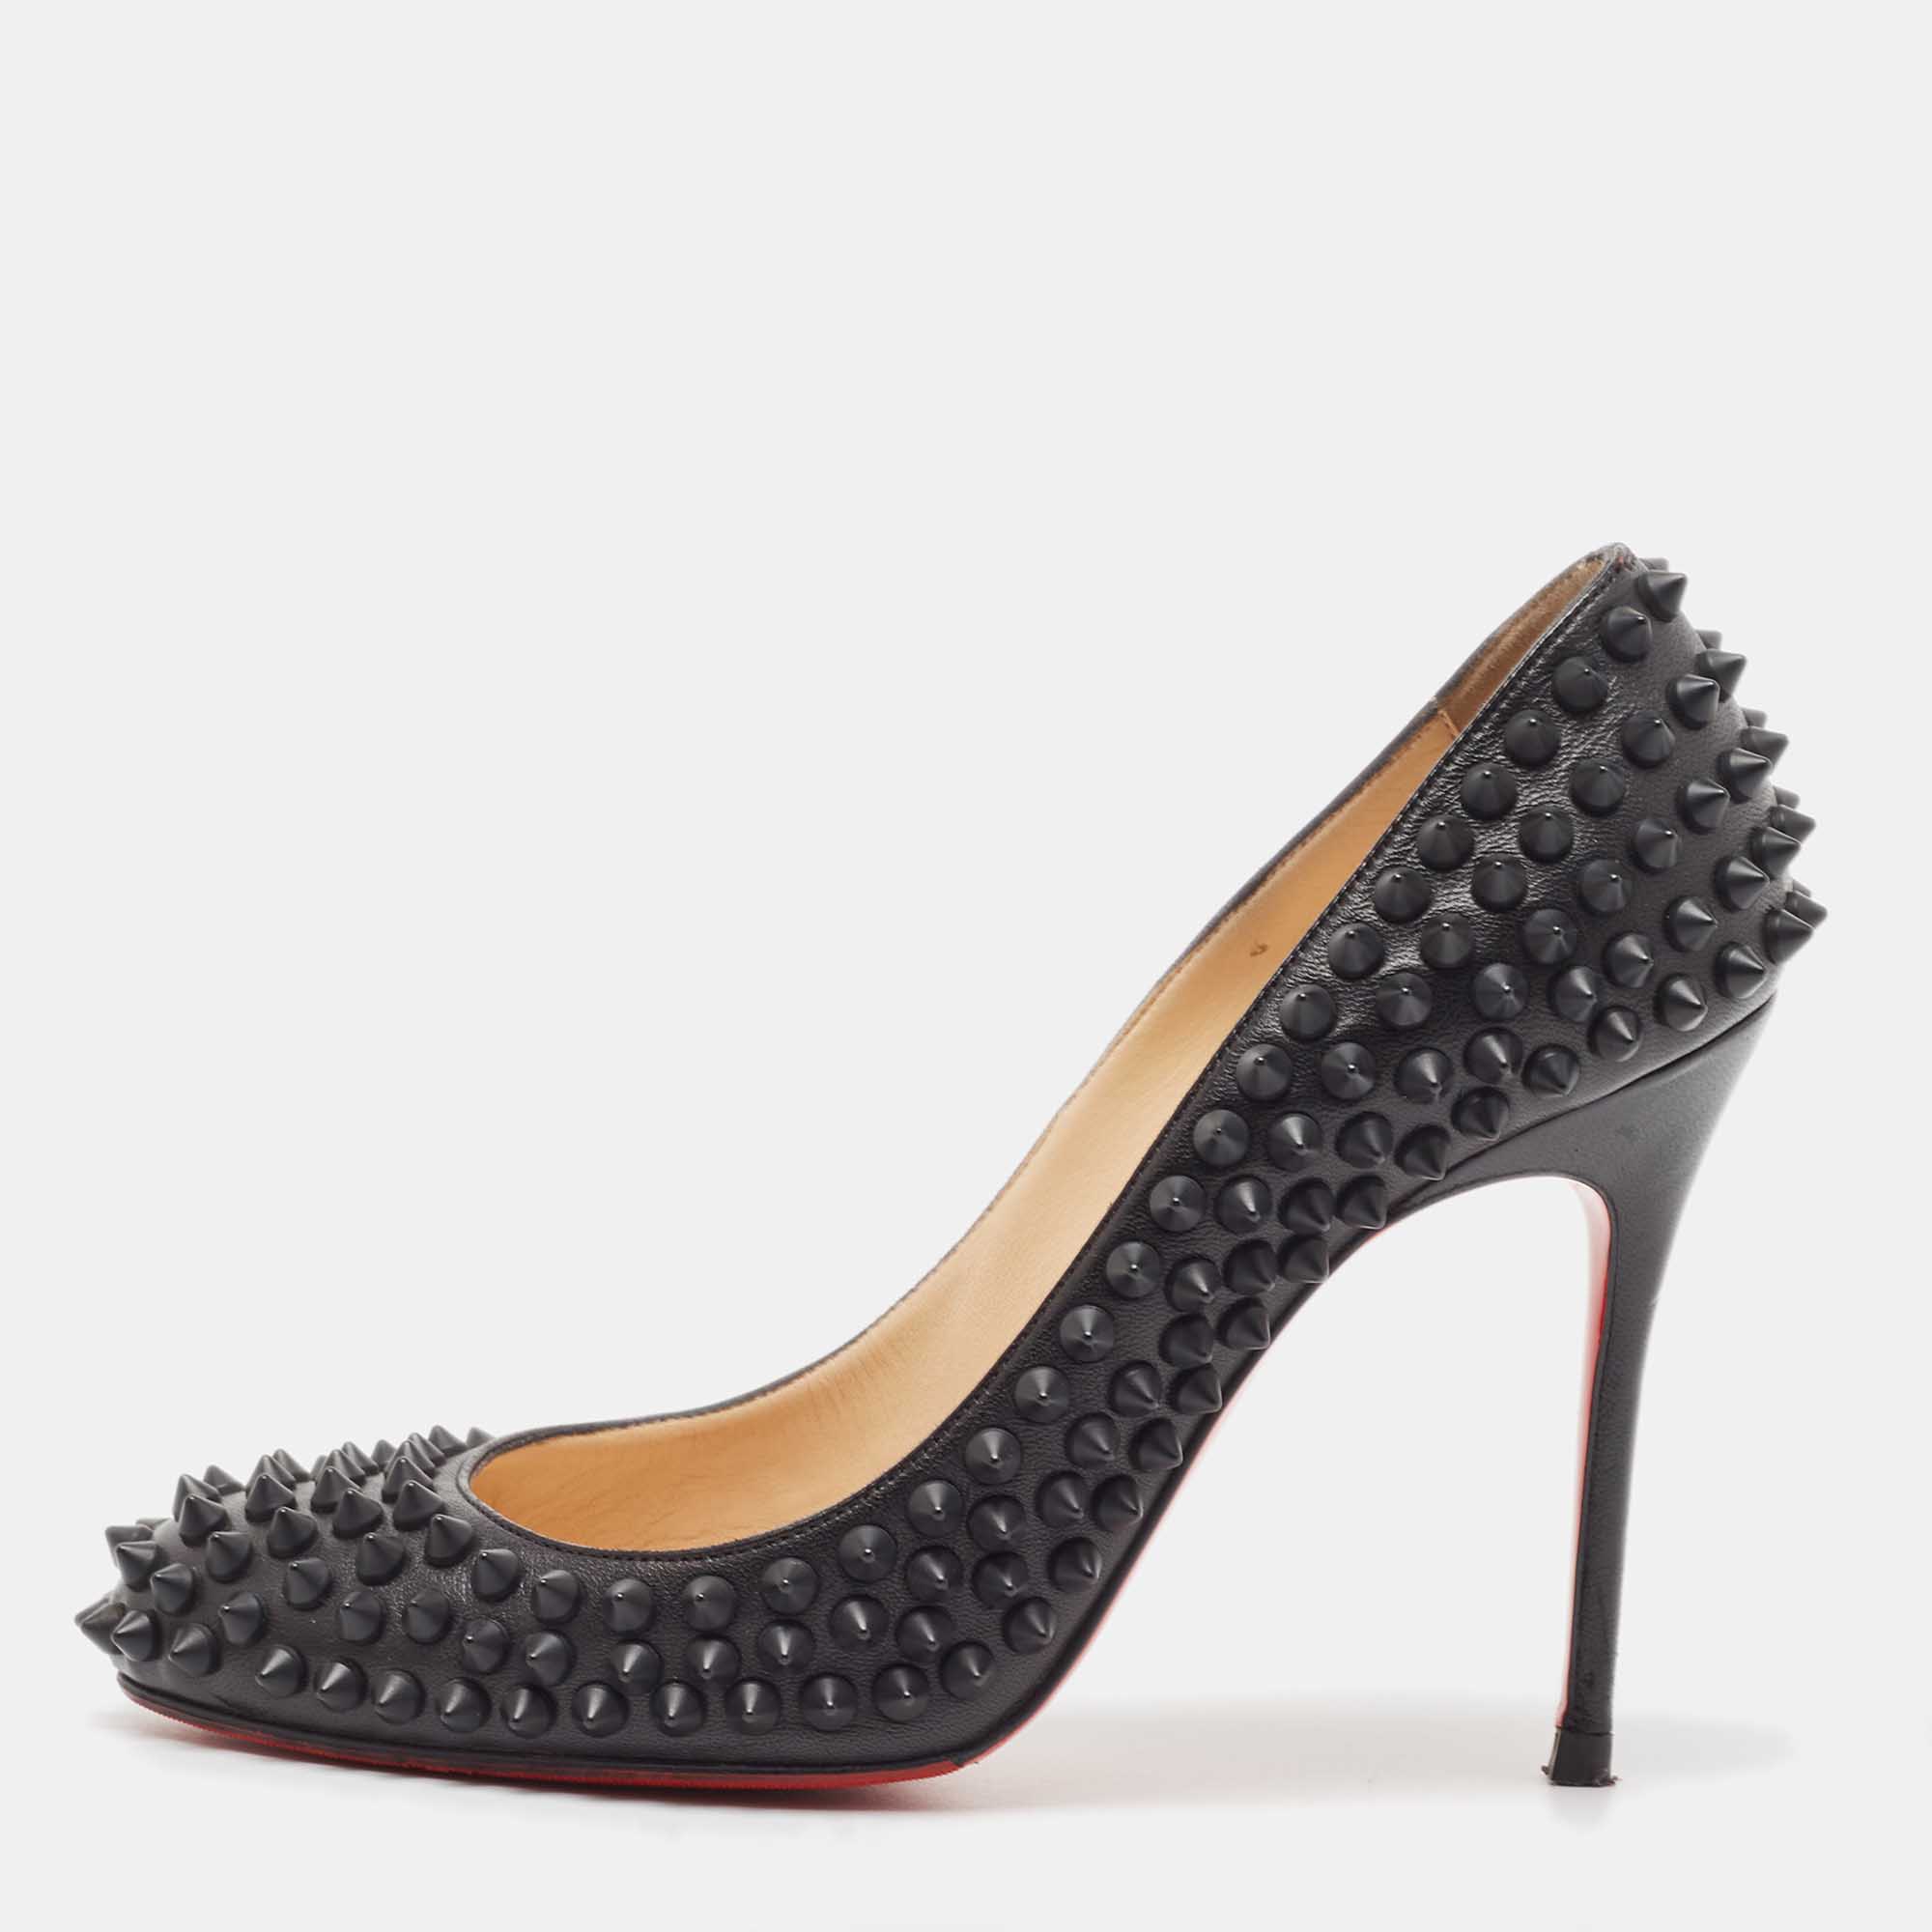 Pre-owned Christian Louboutin Black Leather Fifi Spikes Pumps Size 36.5